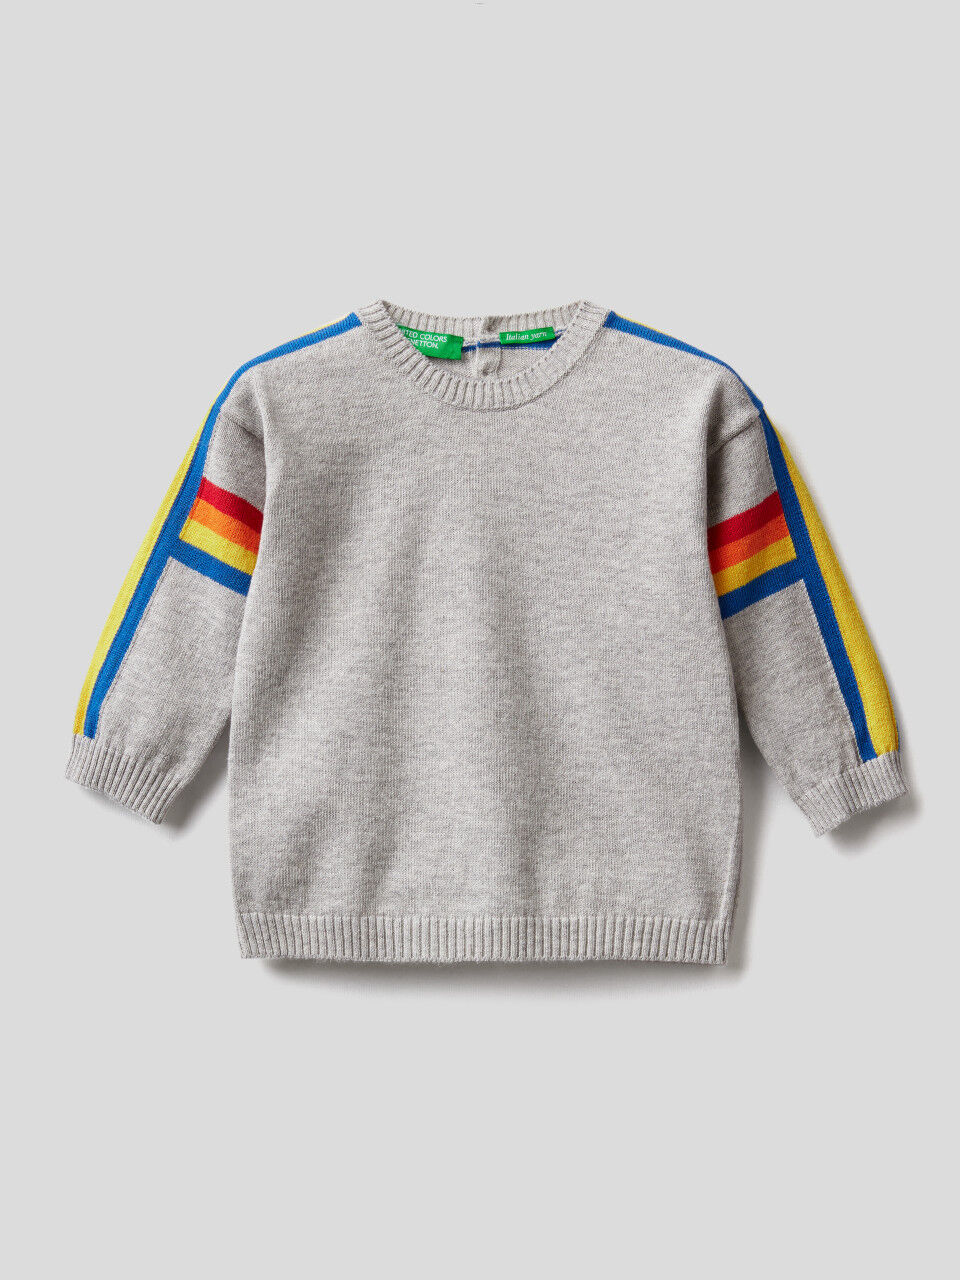 United Colors of Benetton Baby-Jungen Pullover